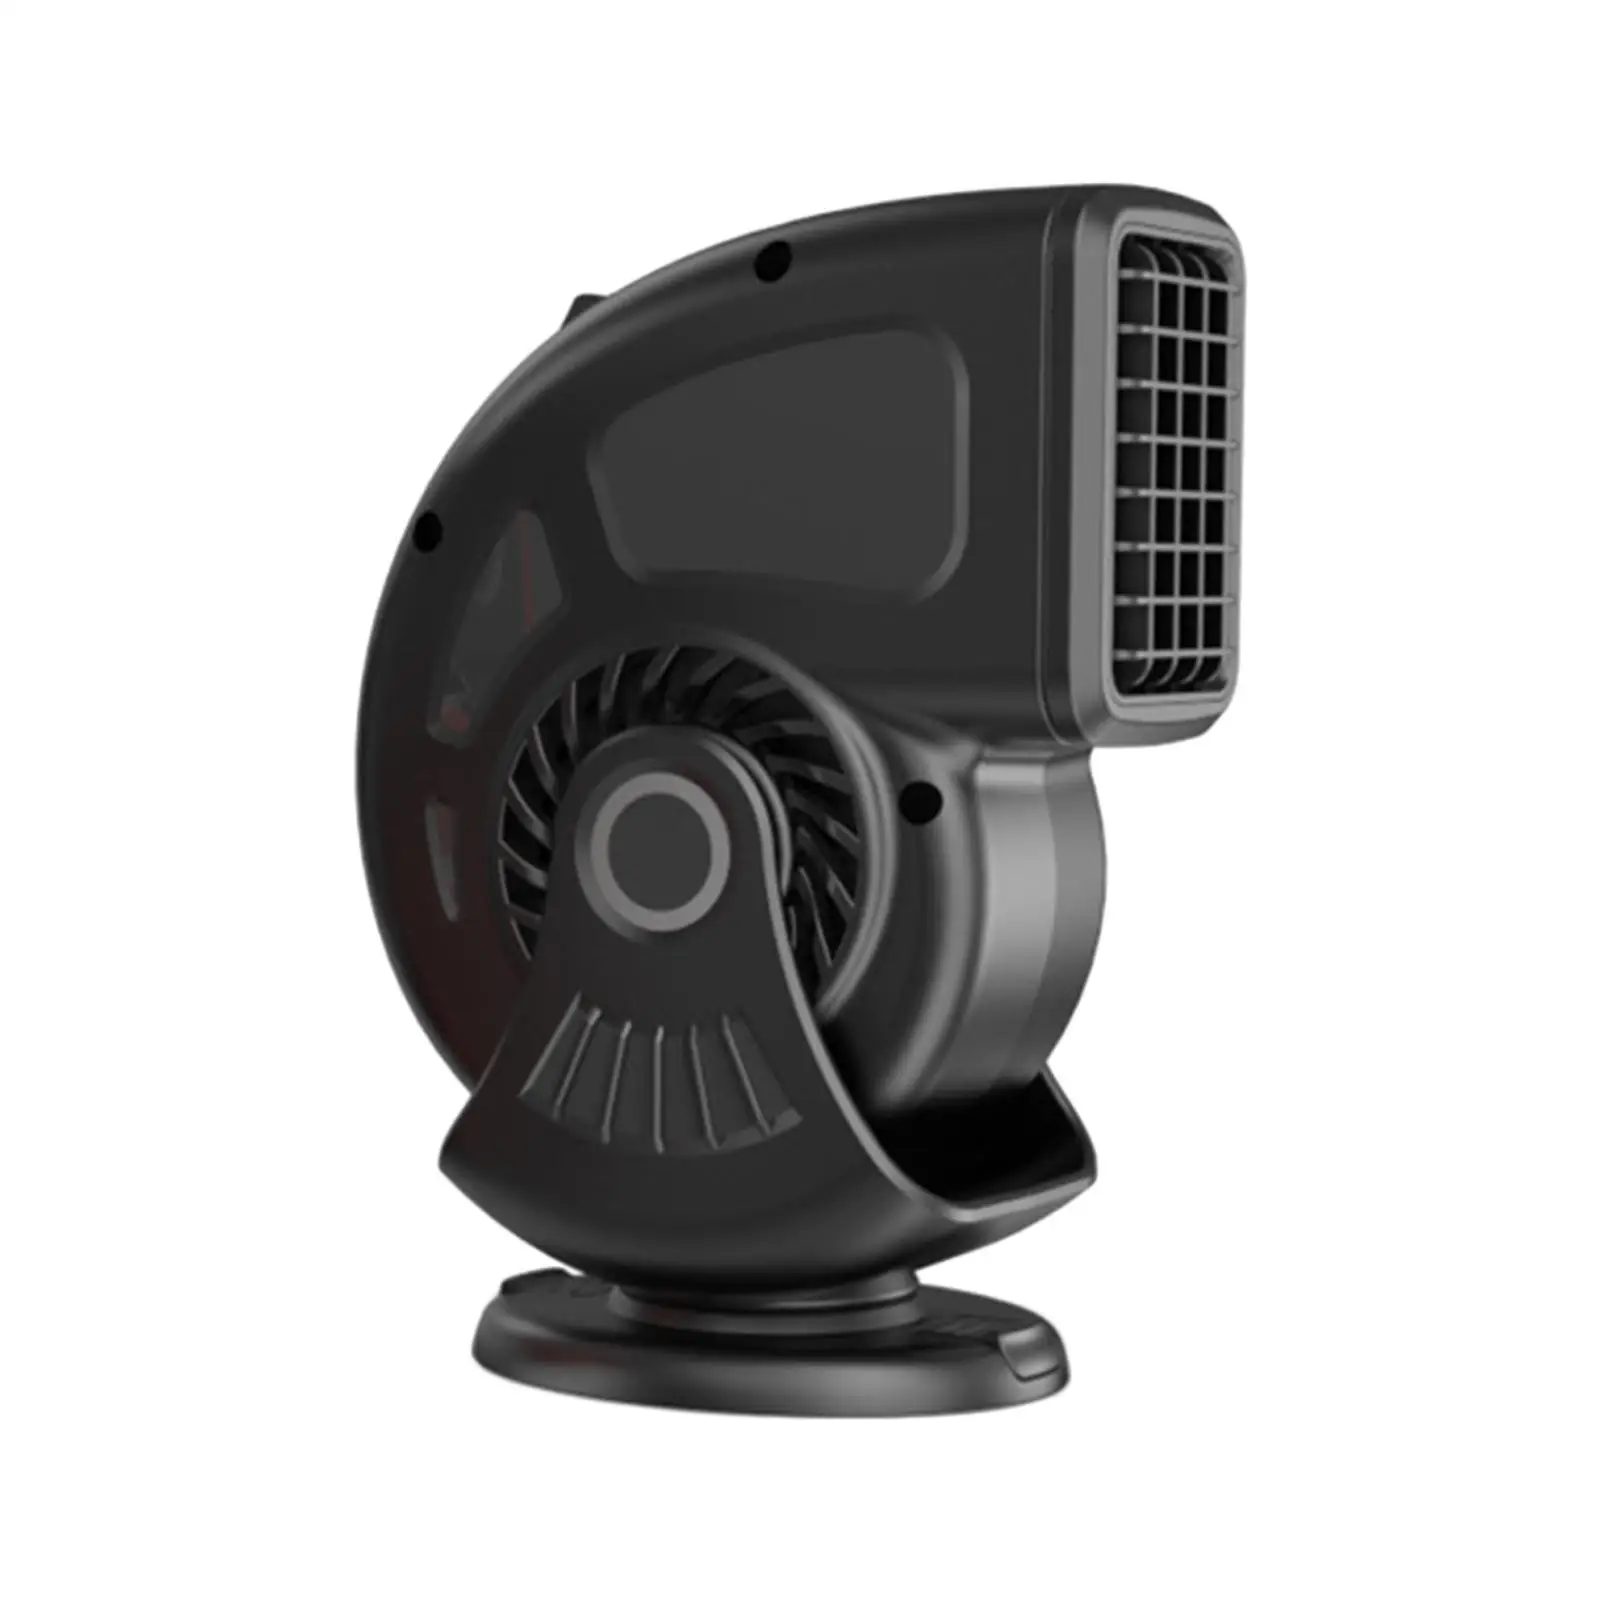 Auto Heater 360 Degree Rotation Fast Heating Space Heater for Trucks